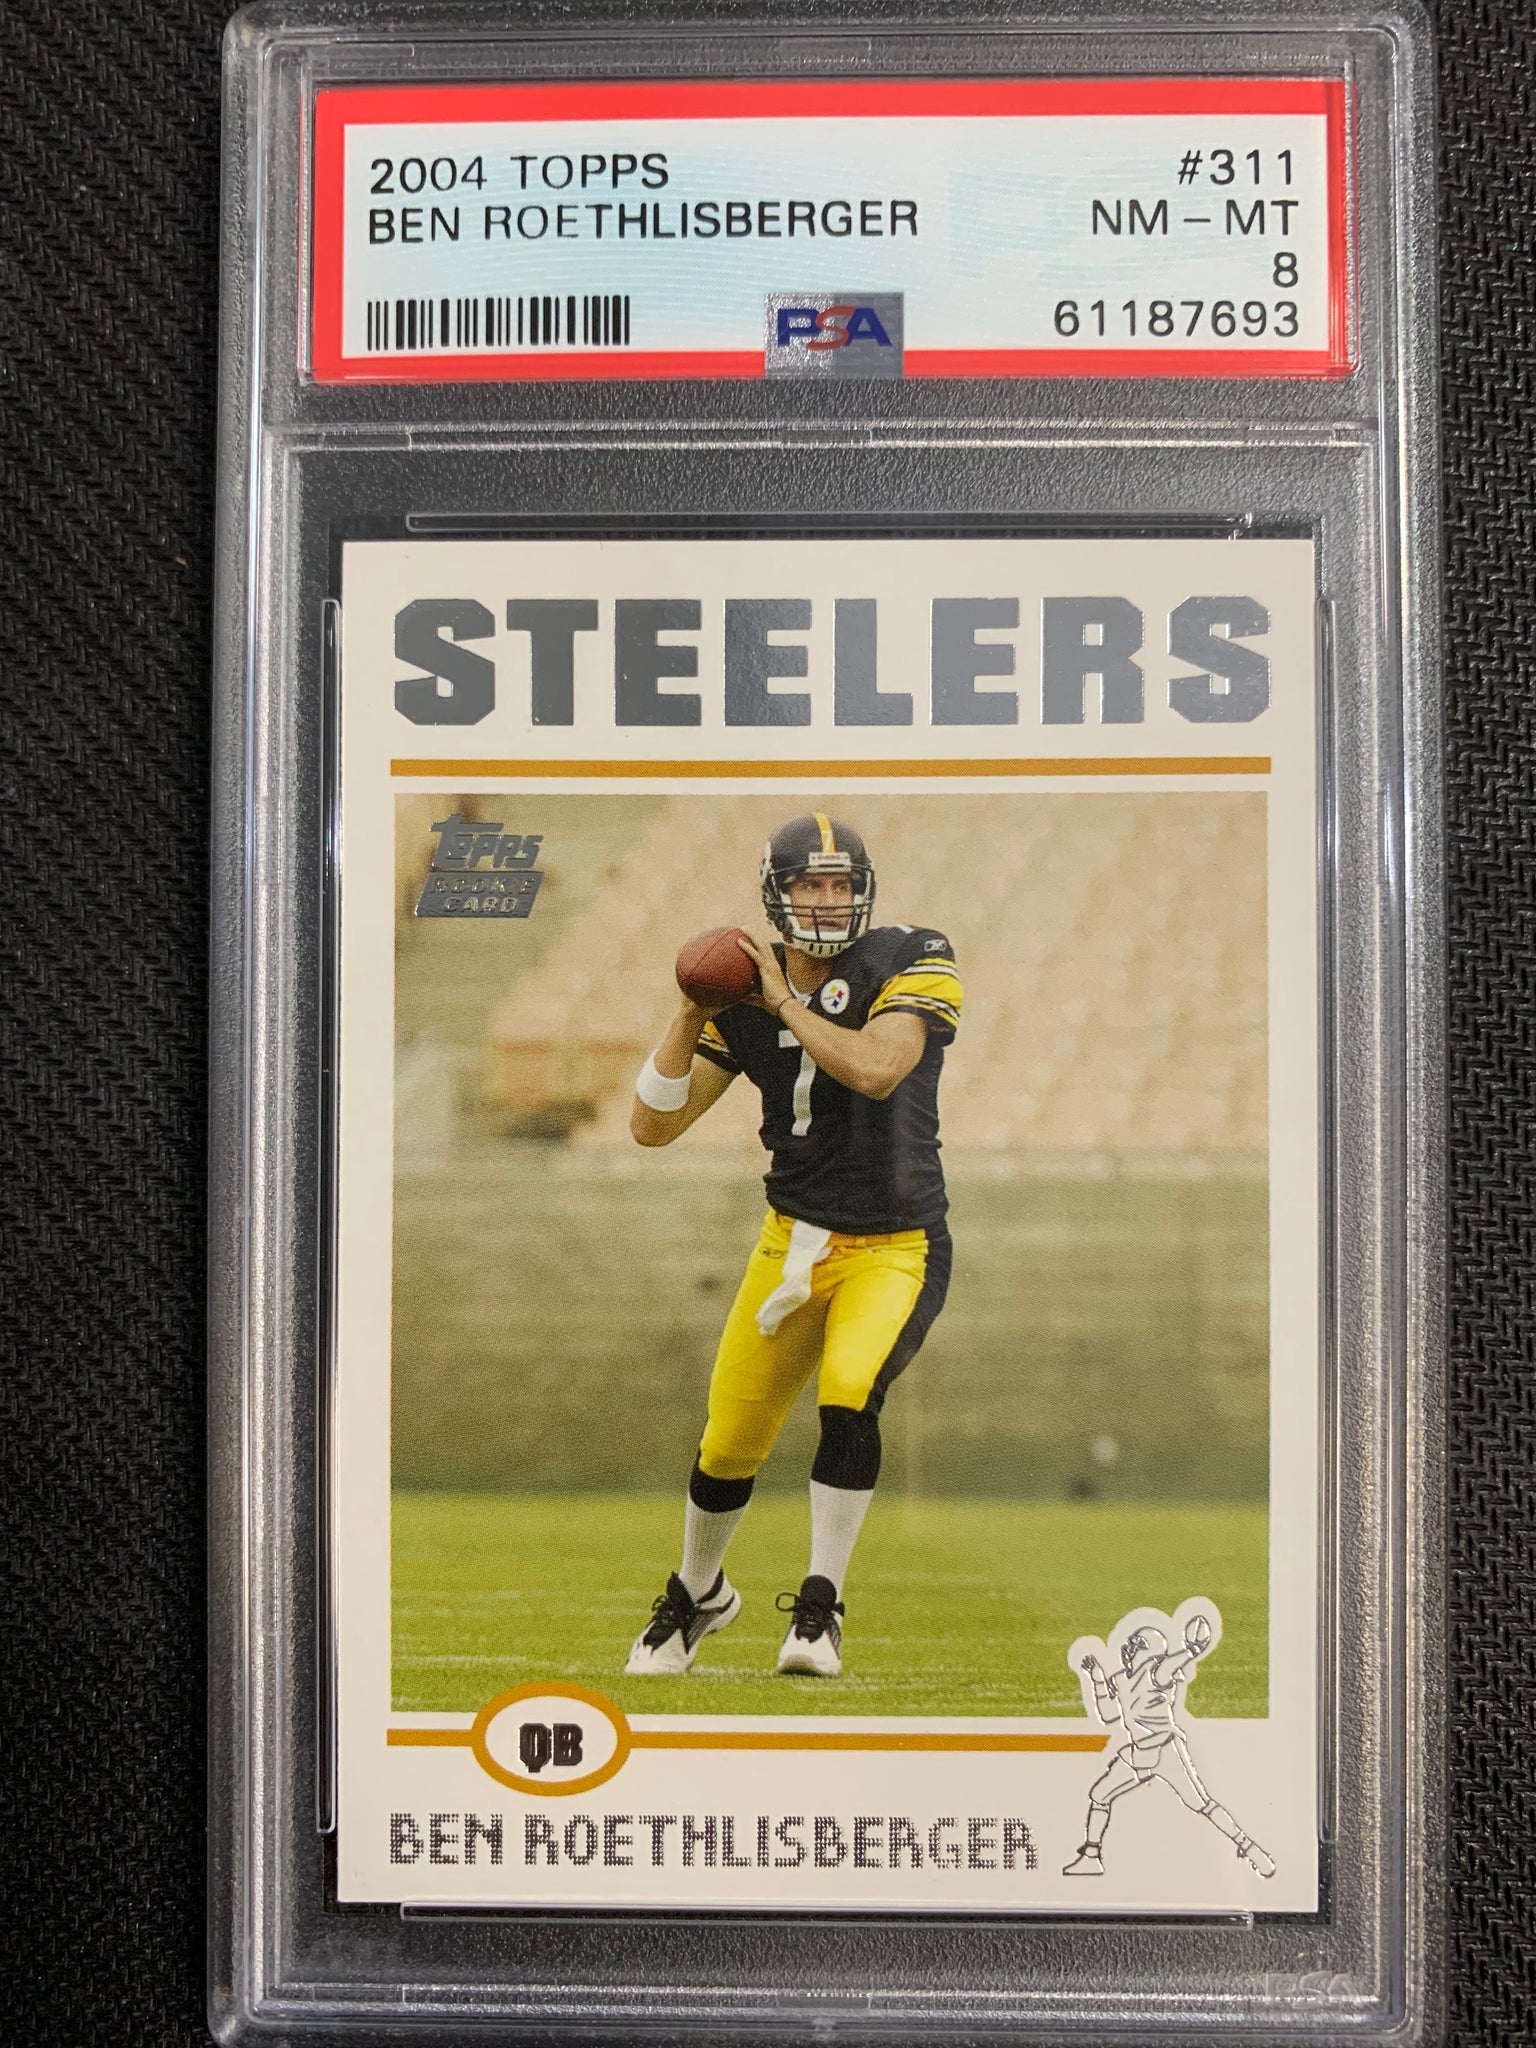 2004 TOPPS FOOTBALL #311 - PITTSBURGH STEELERS  - BEN ROETHLISBERGER TOPPS ROOKIE CARD GRADED PSA 8 NM-MT